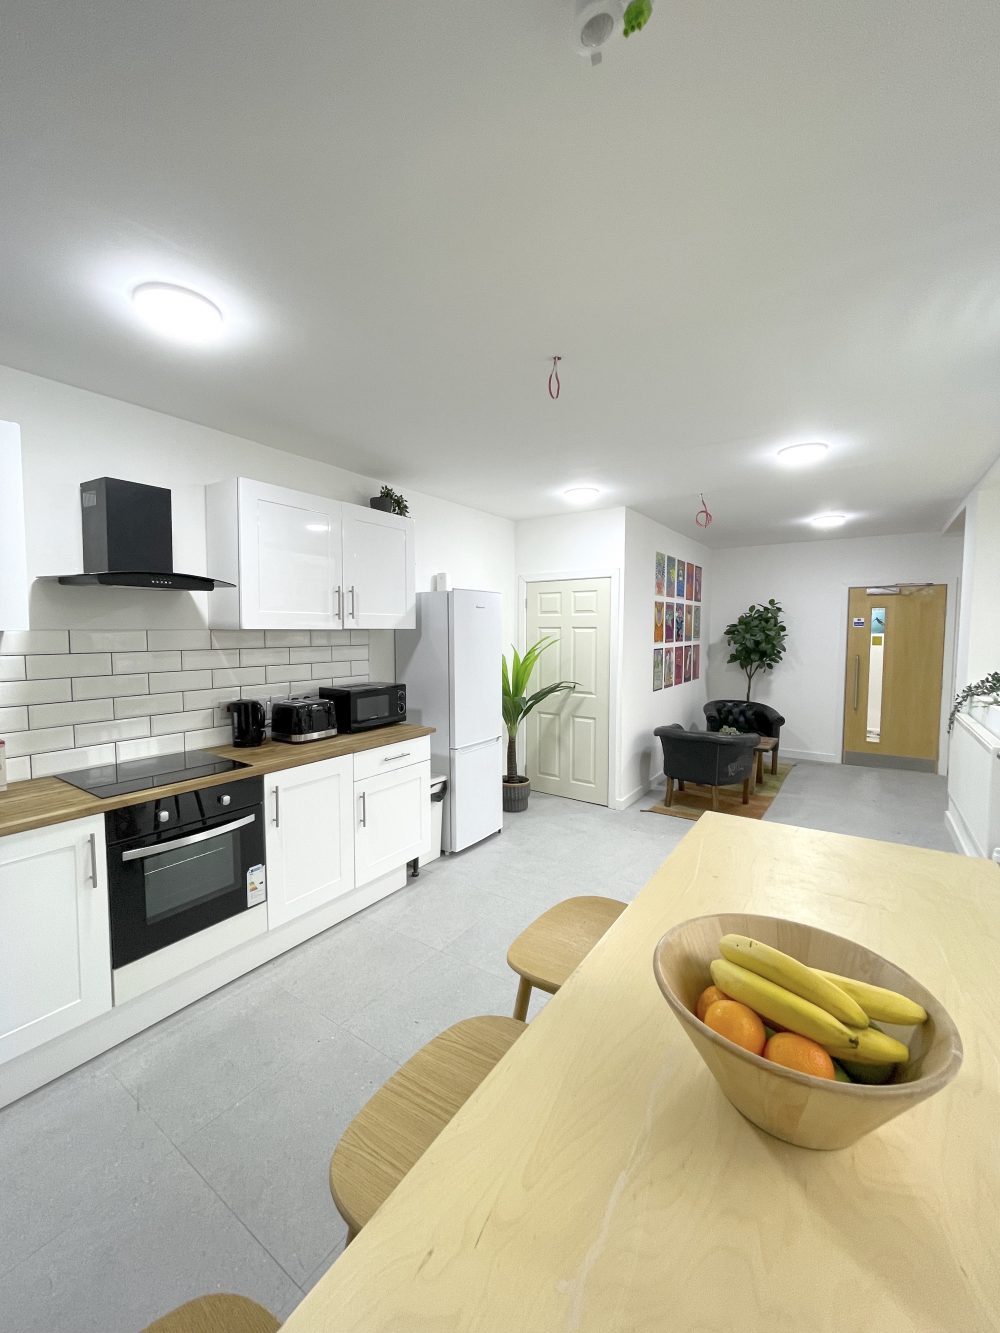 Creative live work style Studio flat Available to rent in EN3 Enfield Alxandra rd Pic24